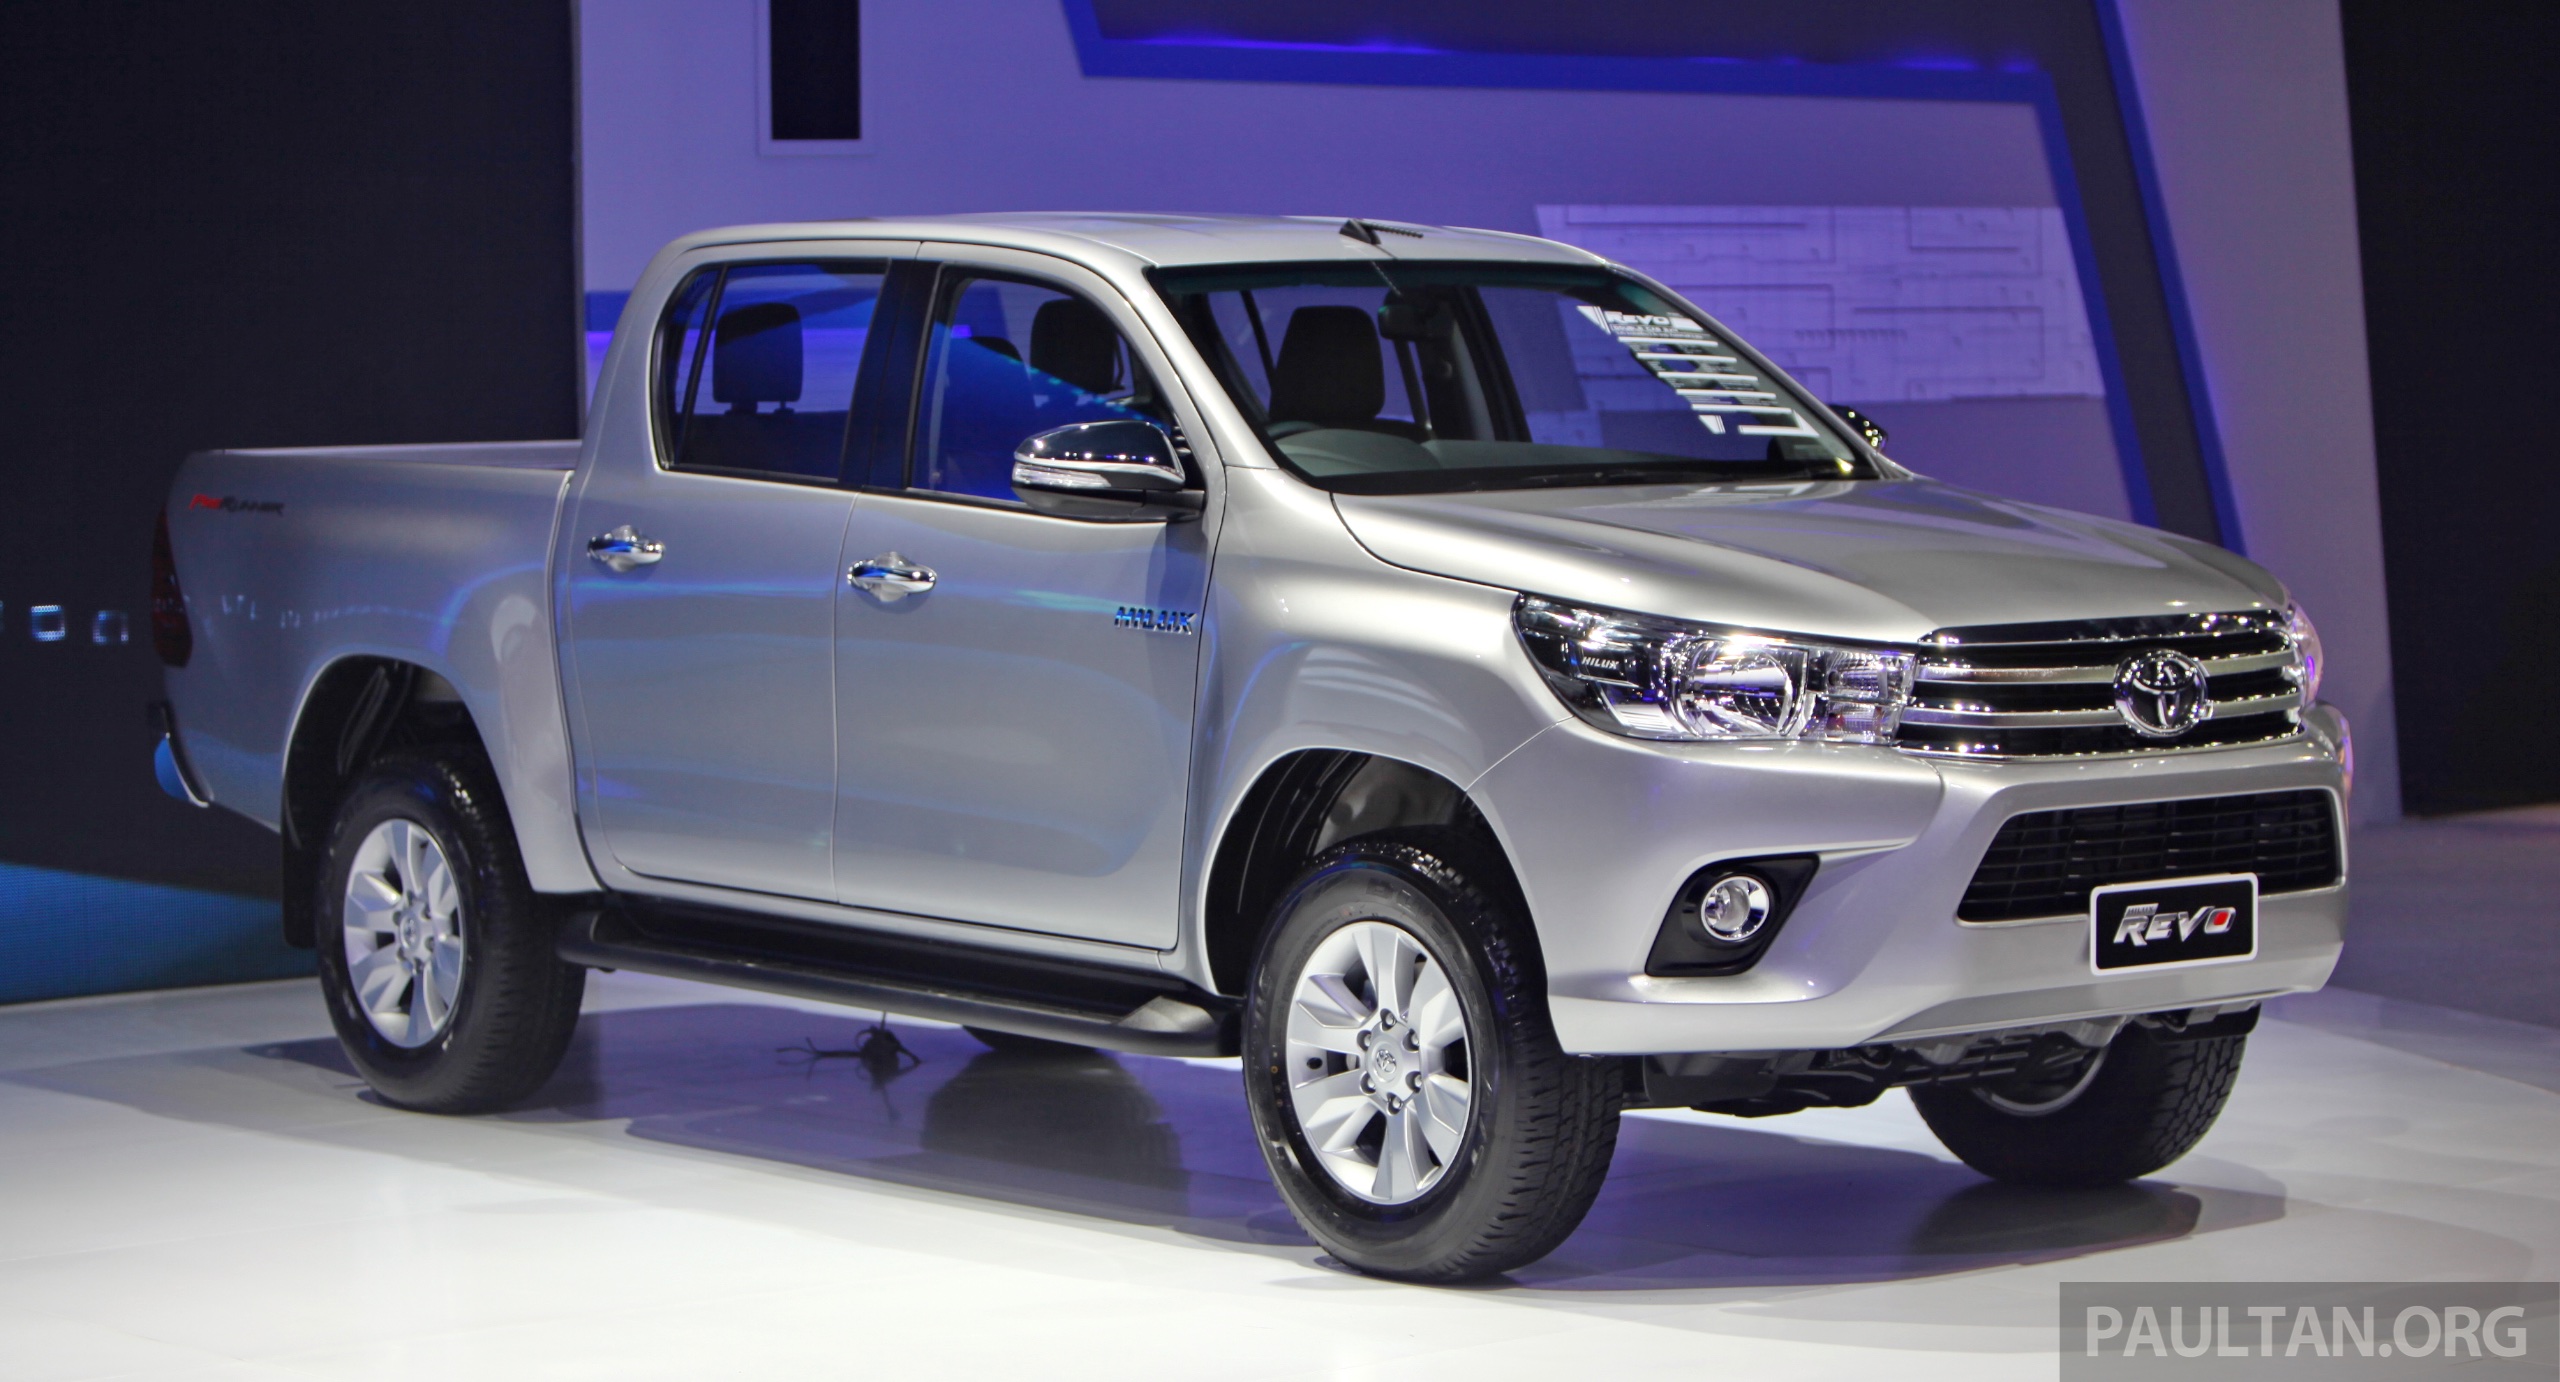 Hilux Revo pickup, manufactured by Toyota Motor Thailand, for export © Paultan.org